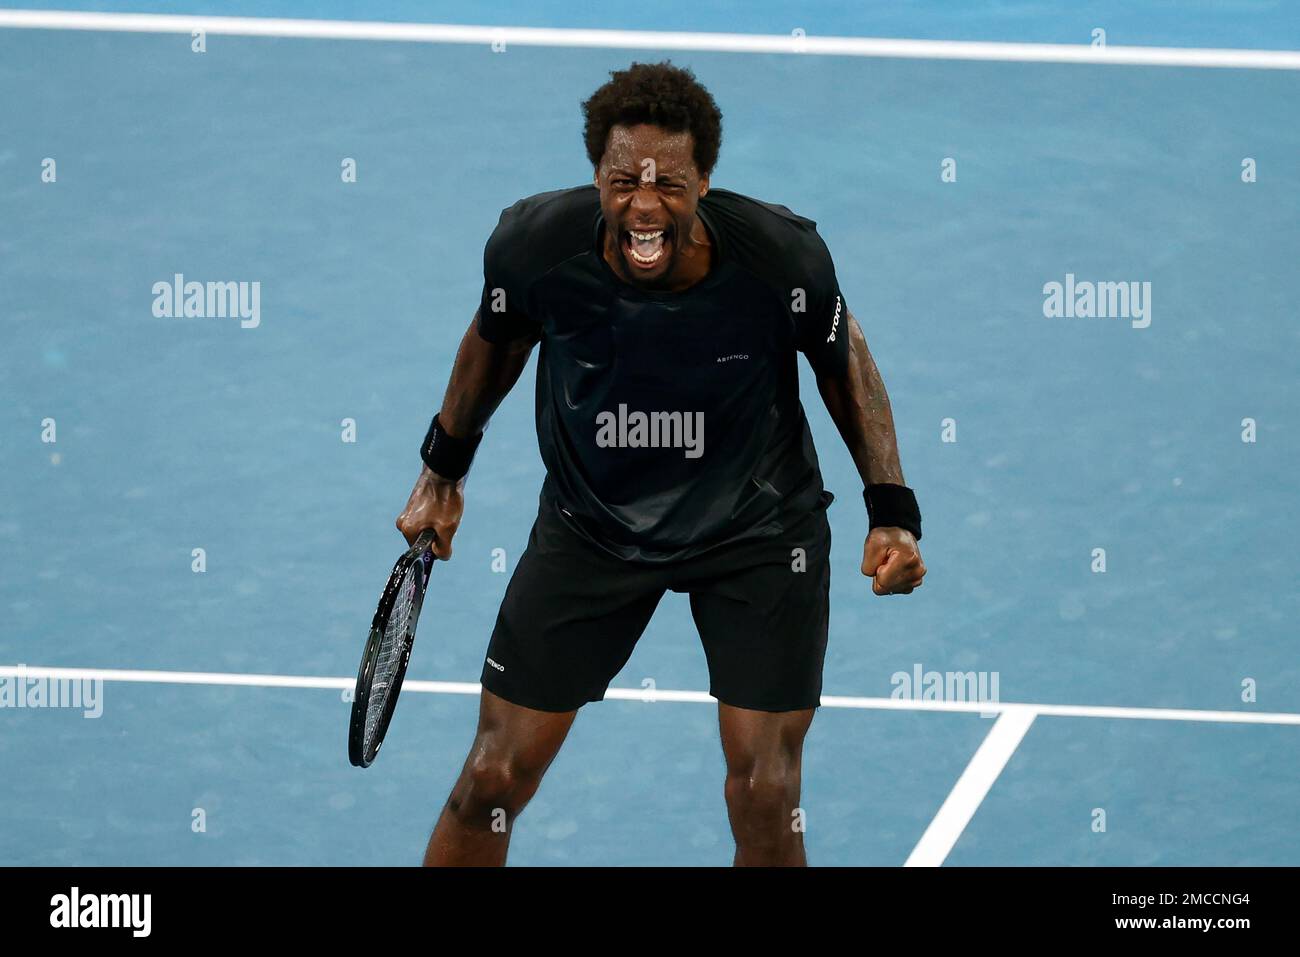 Gael Monfils of France celebrates after defeating Miomir Kecmanovic of Serbia in their fourth round match at the Australian Open tennis championships in Melbourne, Australia, Sunday, Jan